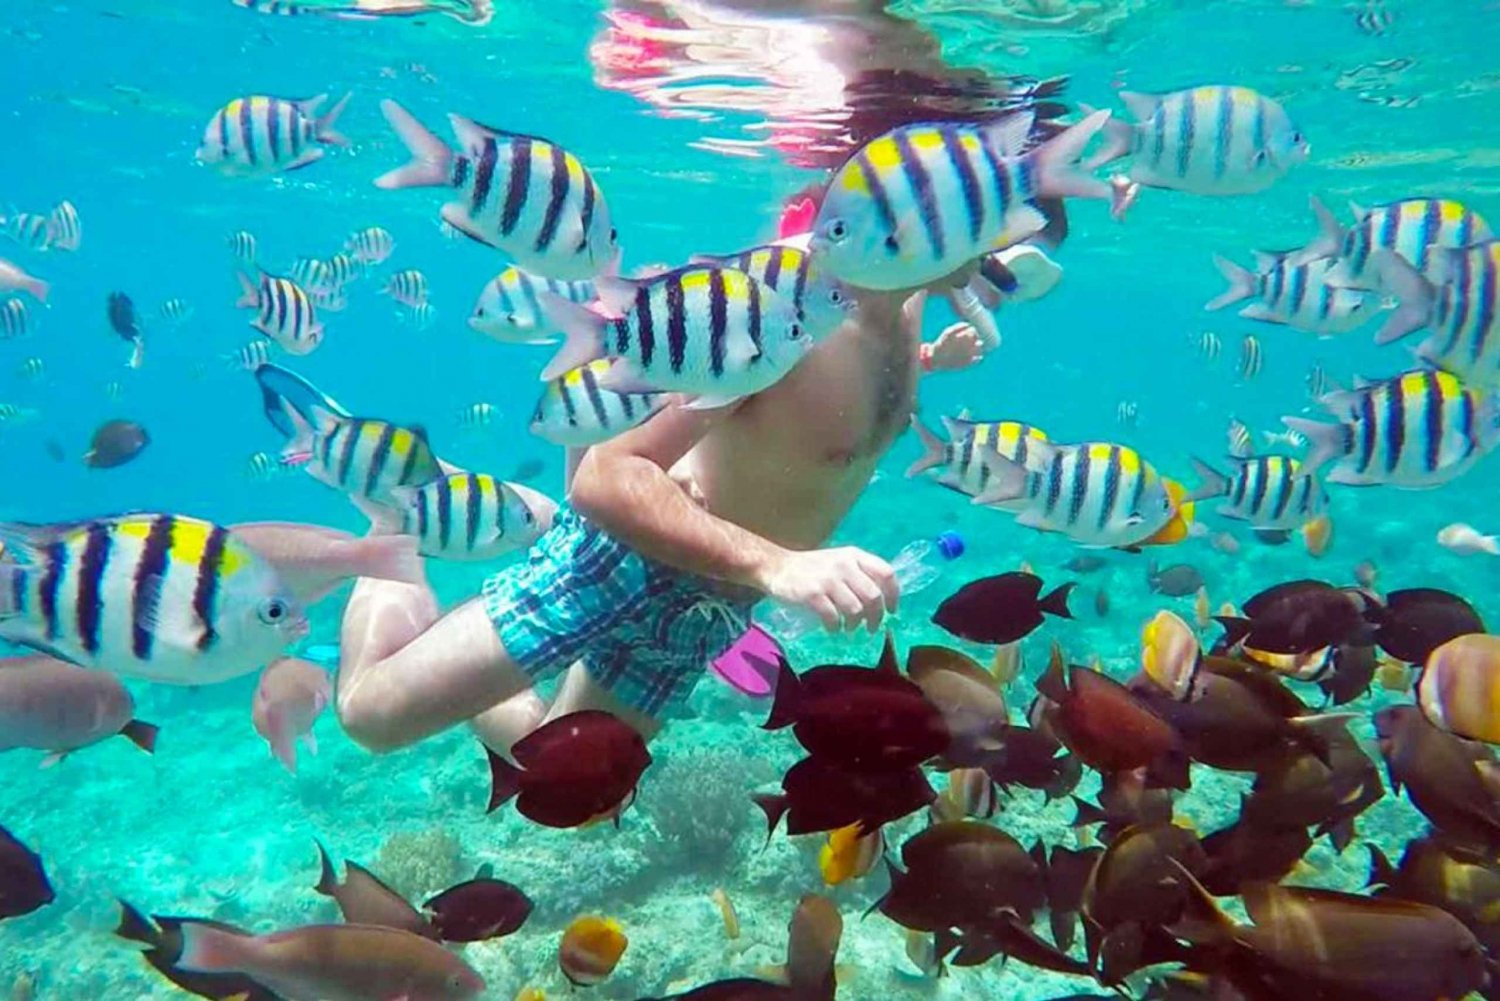 Gili Islands: Half-Day Snorkeling Tour with Pickup